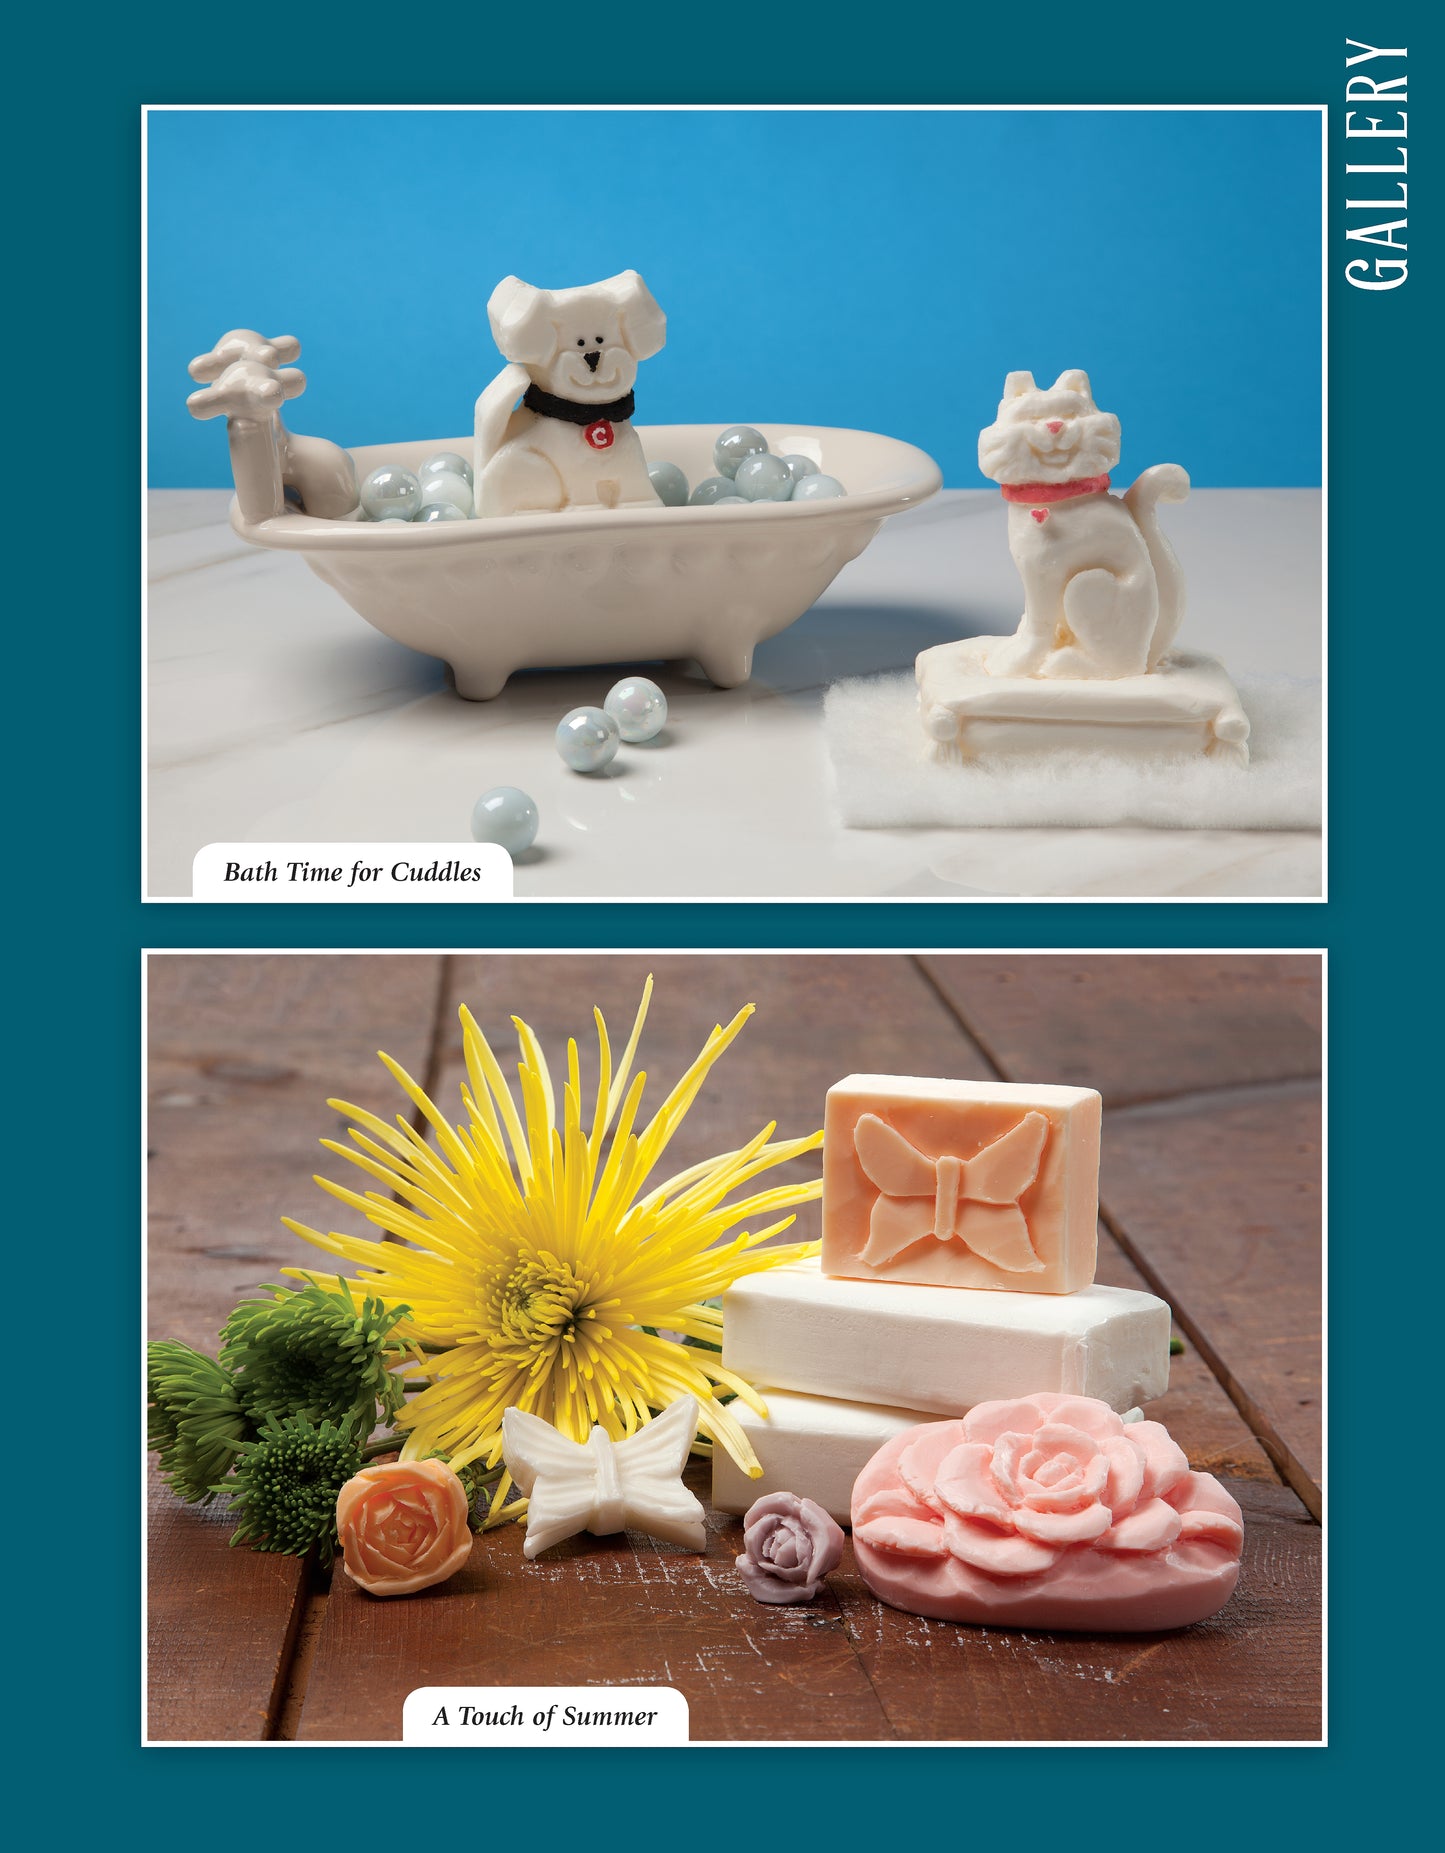 Complete Guide to Soap Carving